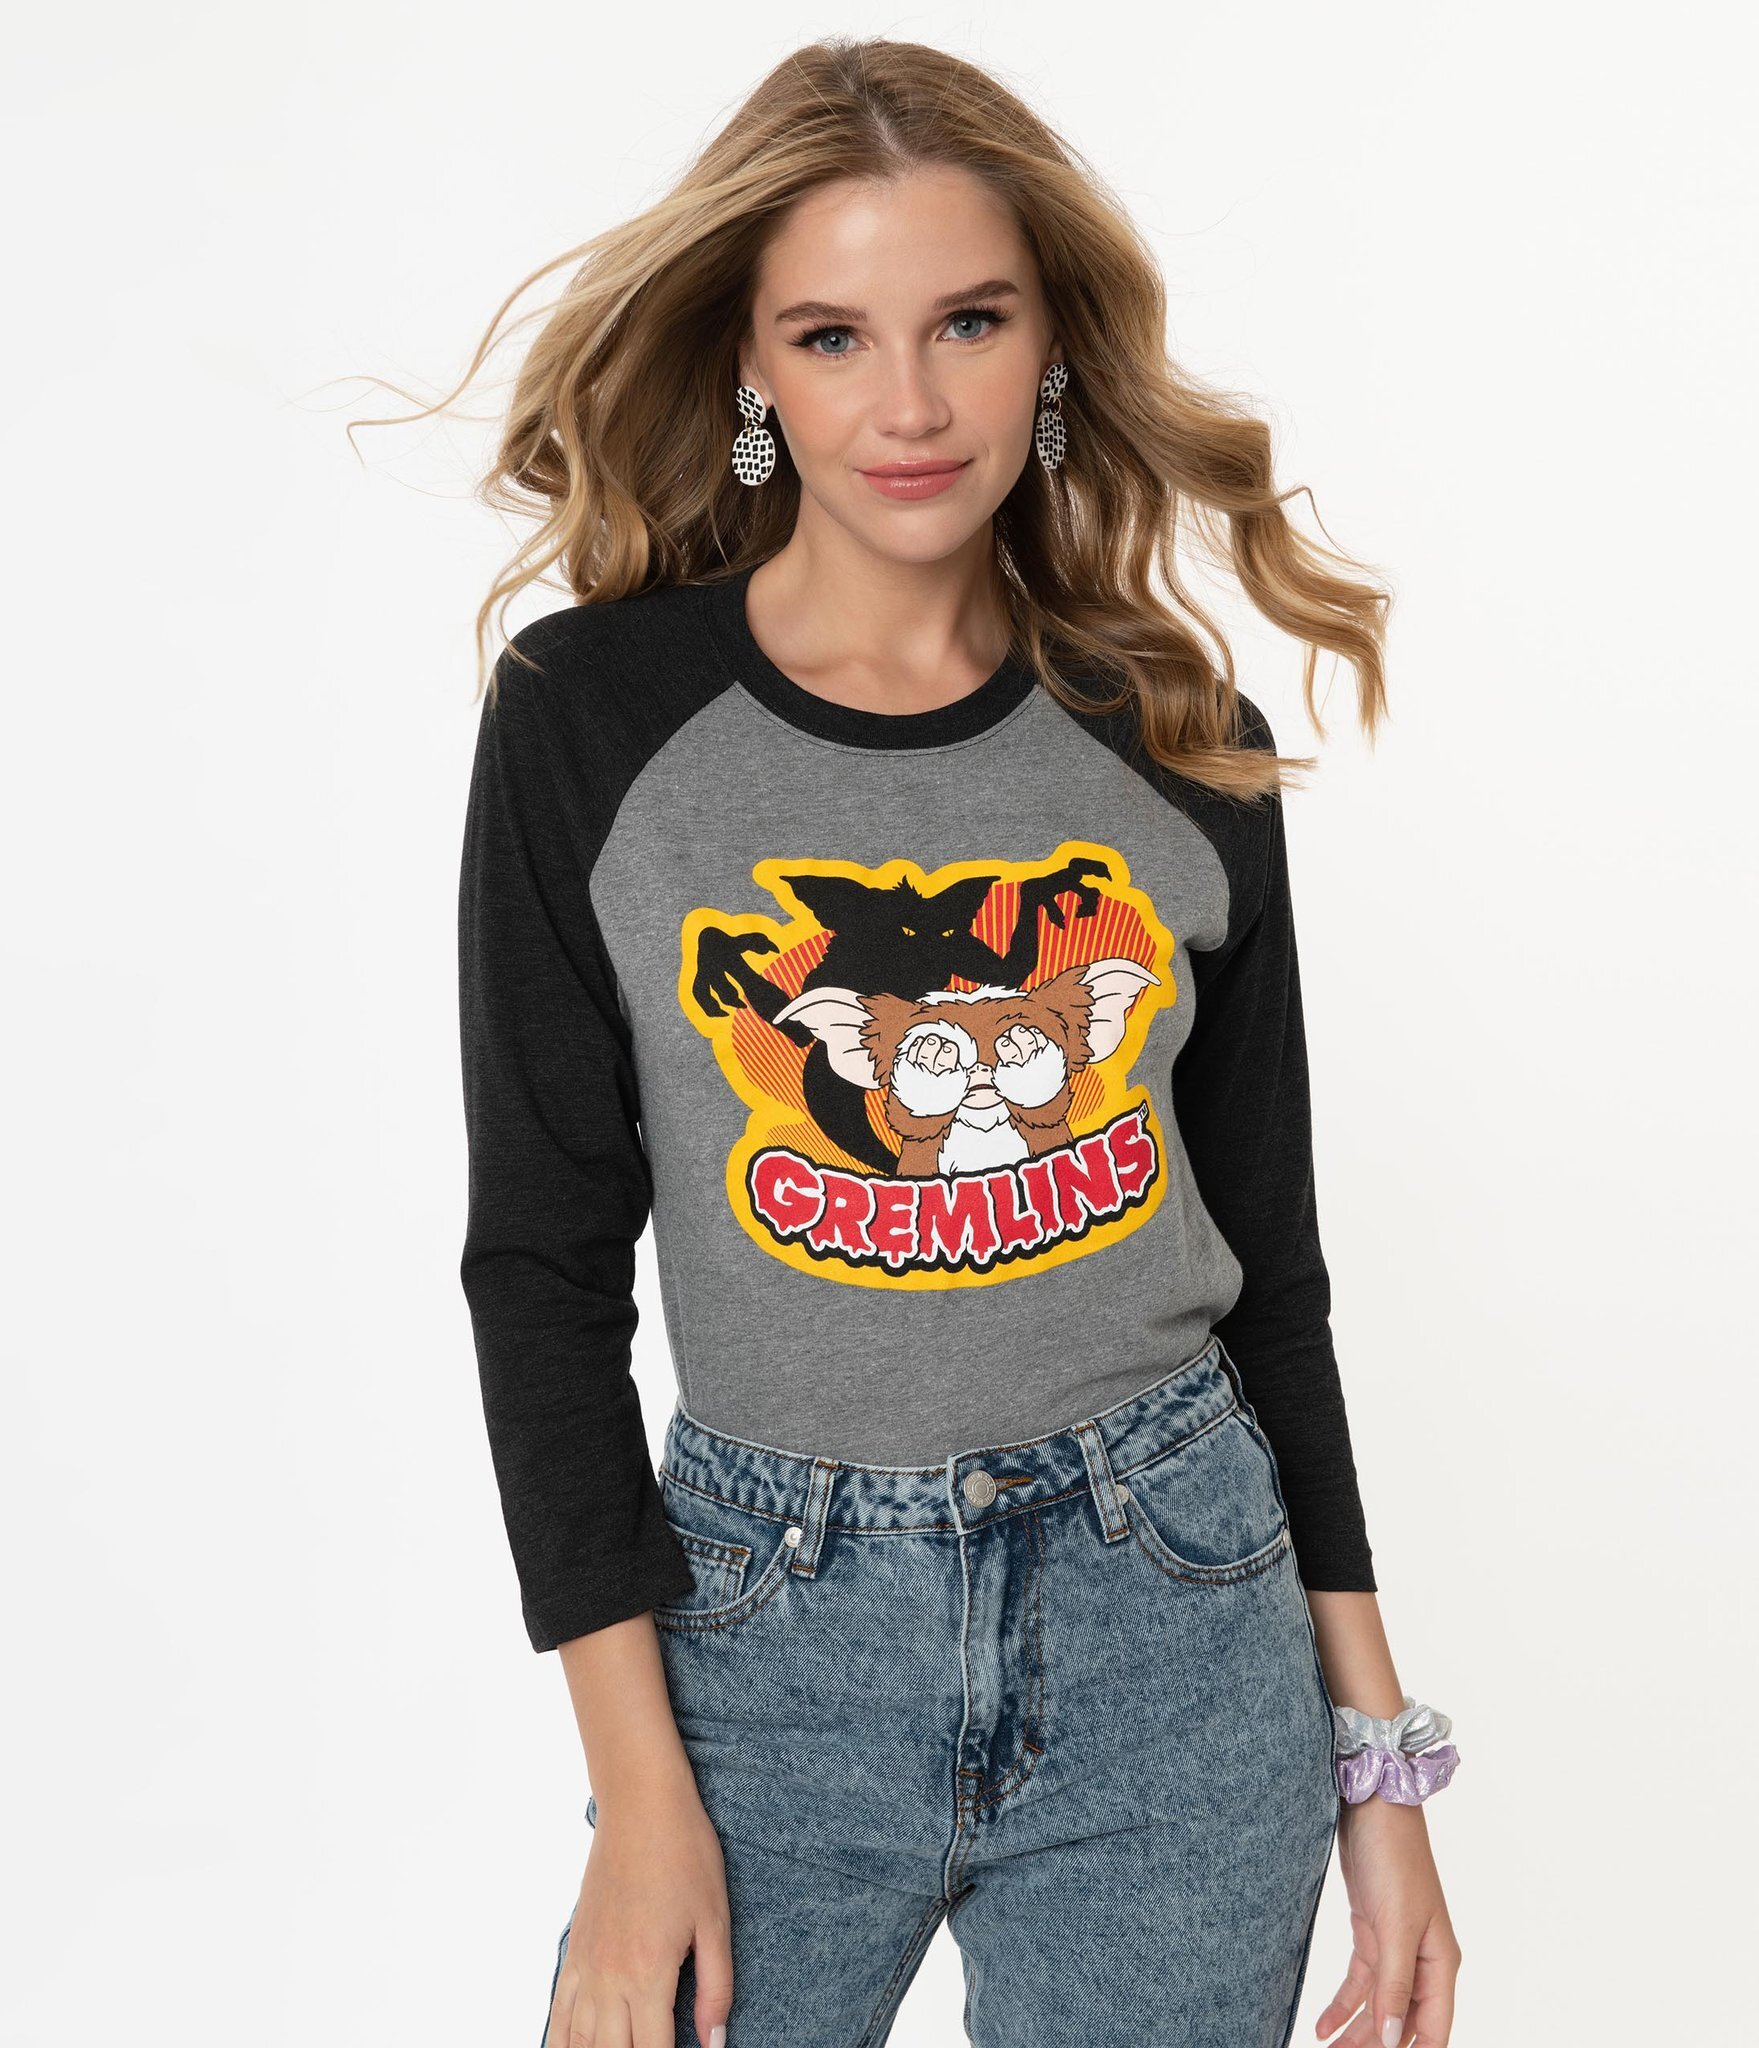 THE GREMLINS GIZMO CROP TOP PLUS SIZE 1X 2X 3X NEW!